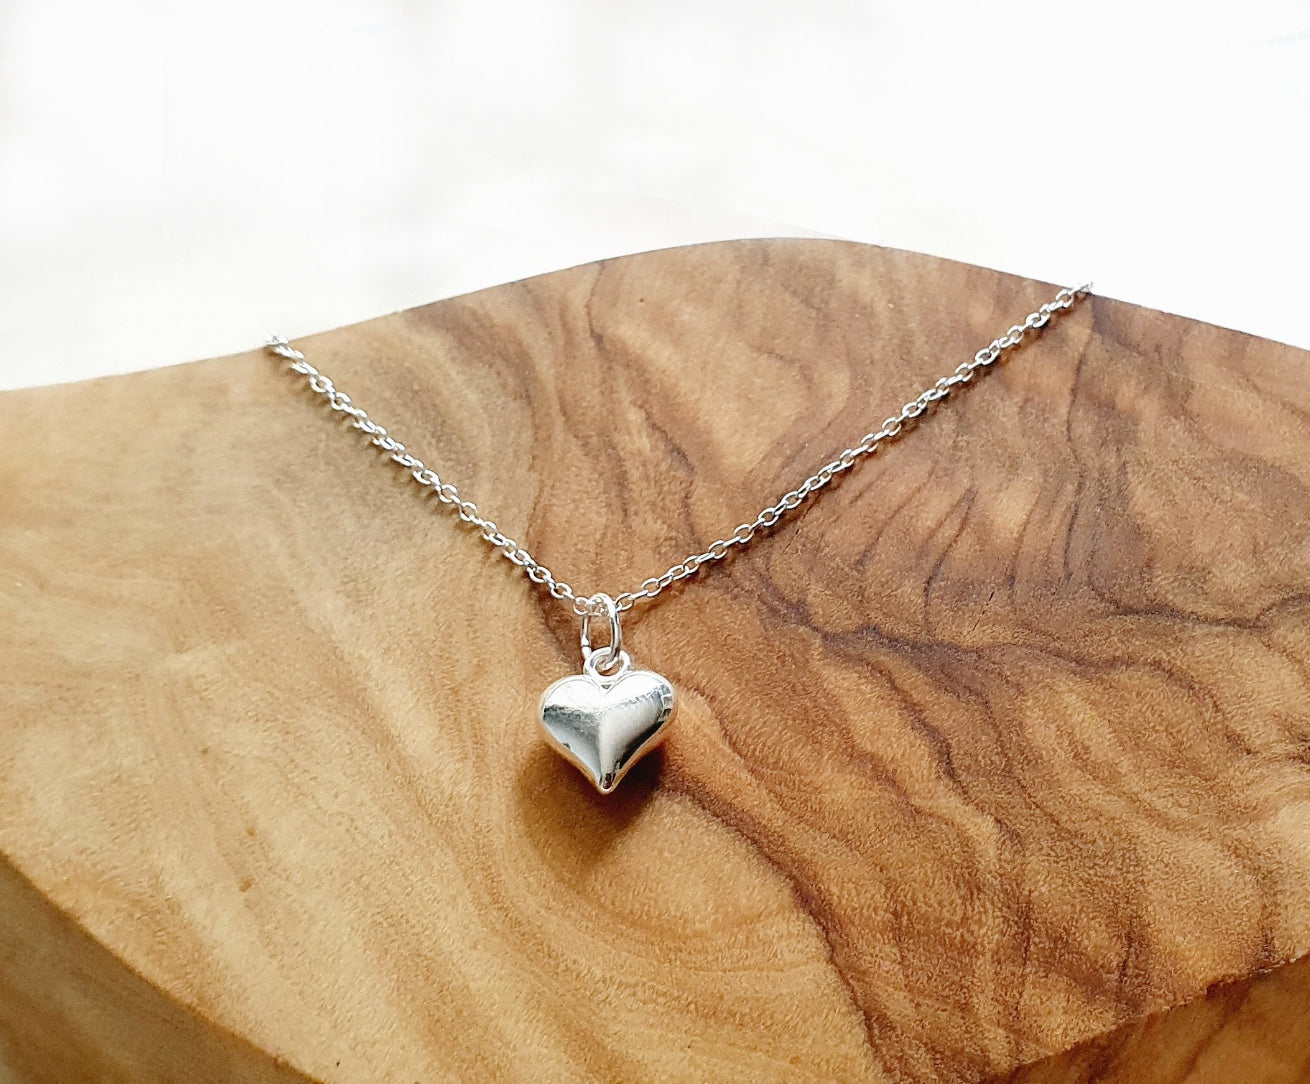 Bridesmaid Puffy Heart Necklace in Sterling Silver 925, Personalised Gift